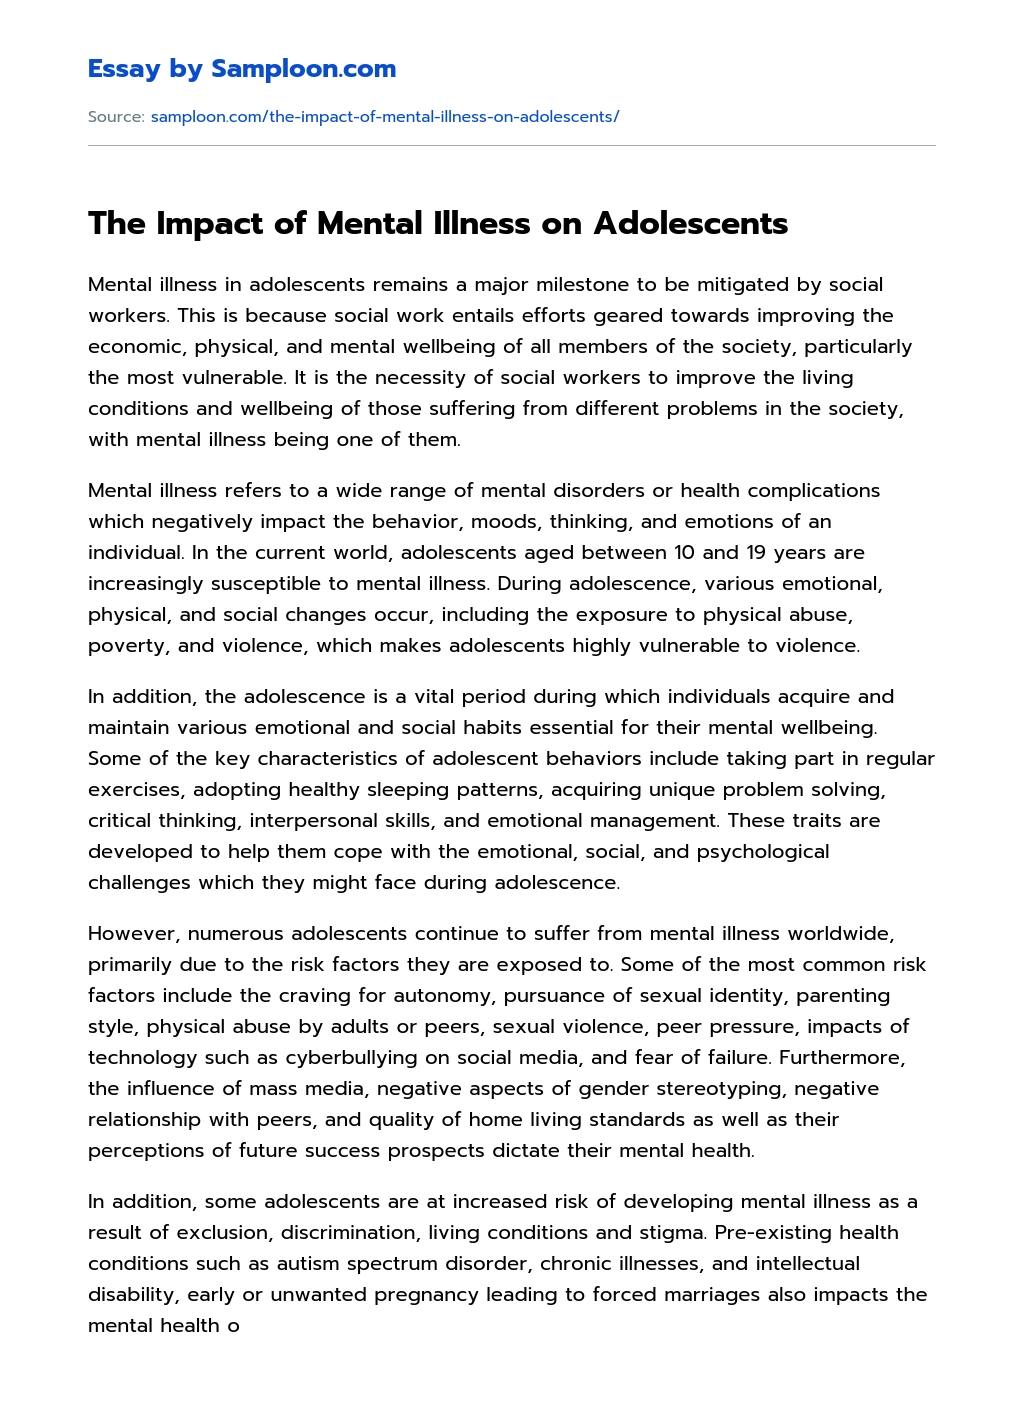 The Impact of Mental Illness on Adolescents essay